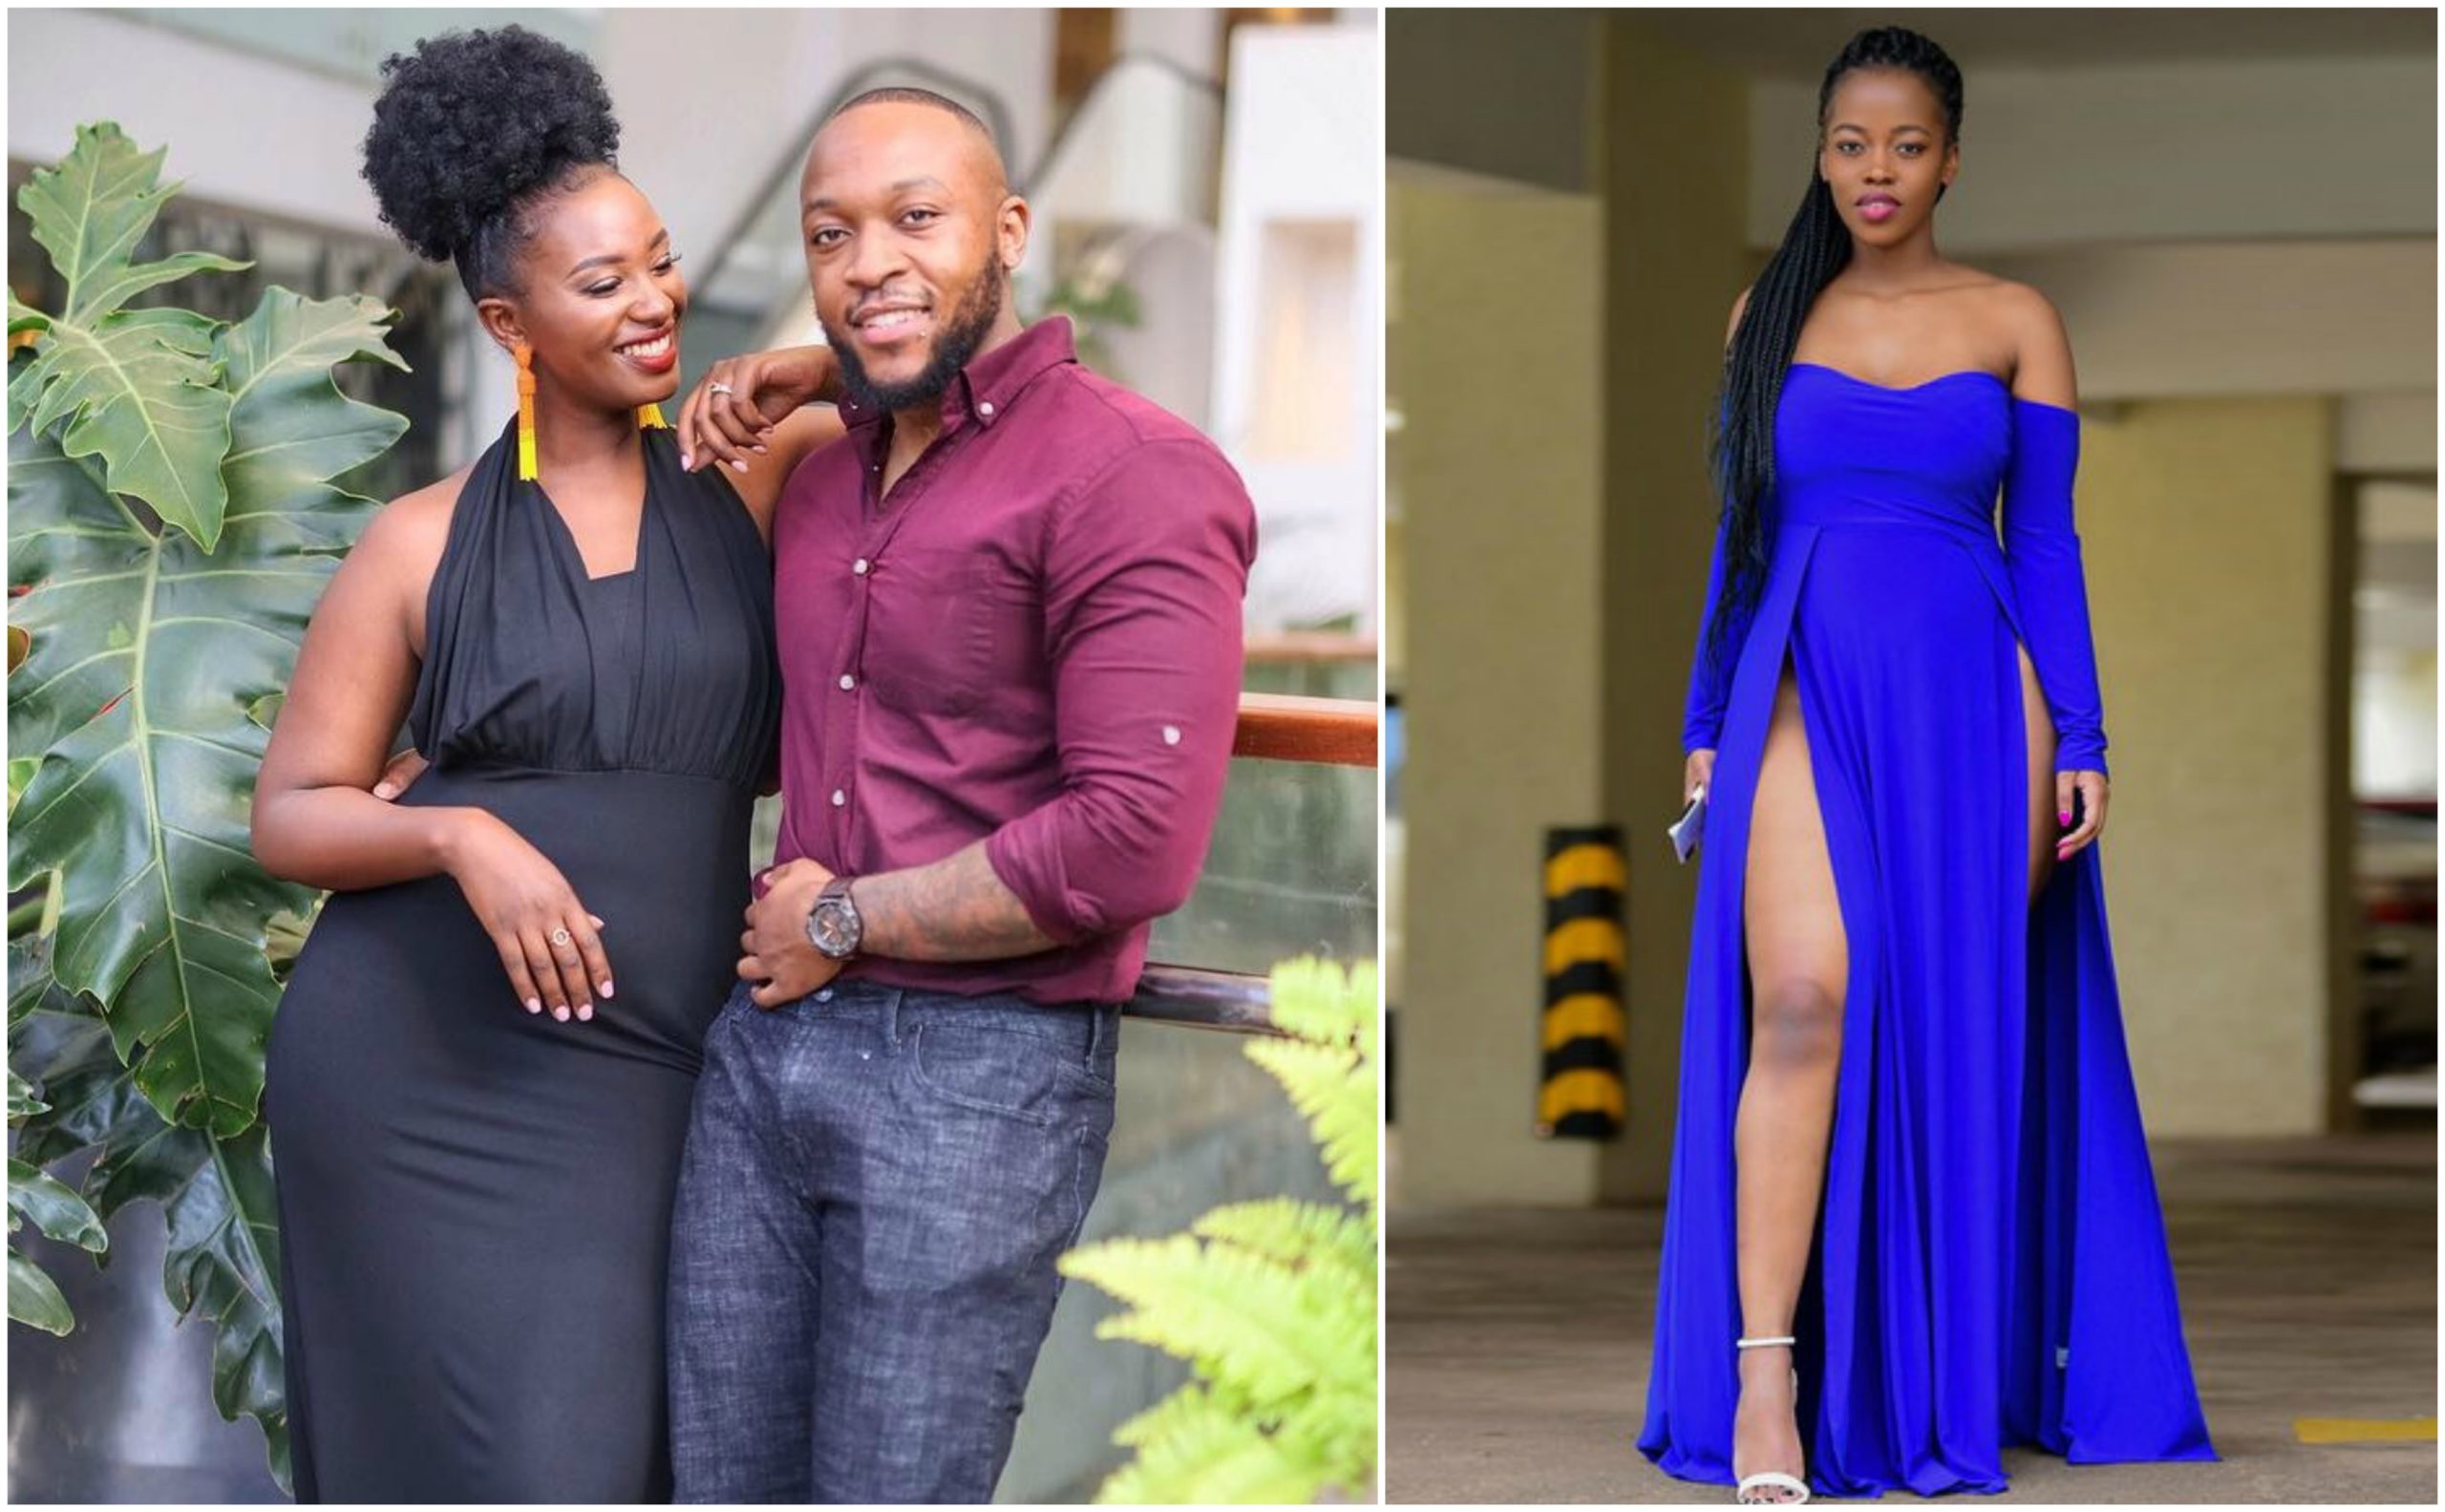 Frankie Just Gym It finally reveals why he hid his affair with Corazon Kwamboka from Maureen Waititu (Video)